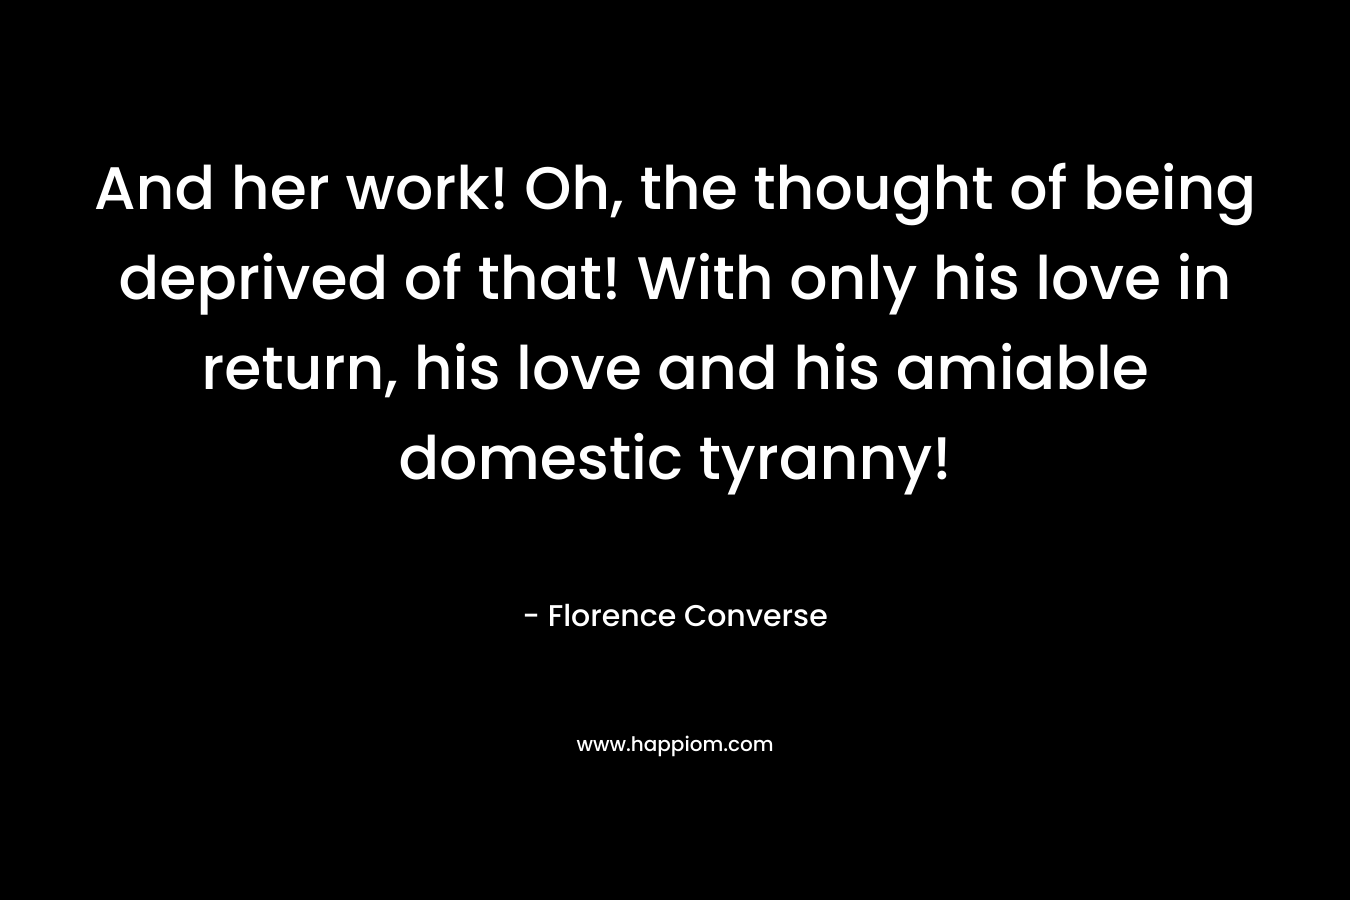 And her work! Oh, the thought of being deprived of that! With only his love in return, his love and his amiable domestic tyranny! – Florence Converse